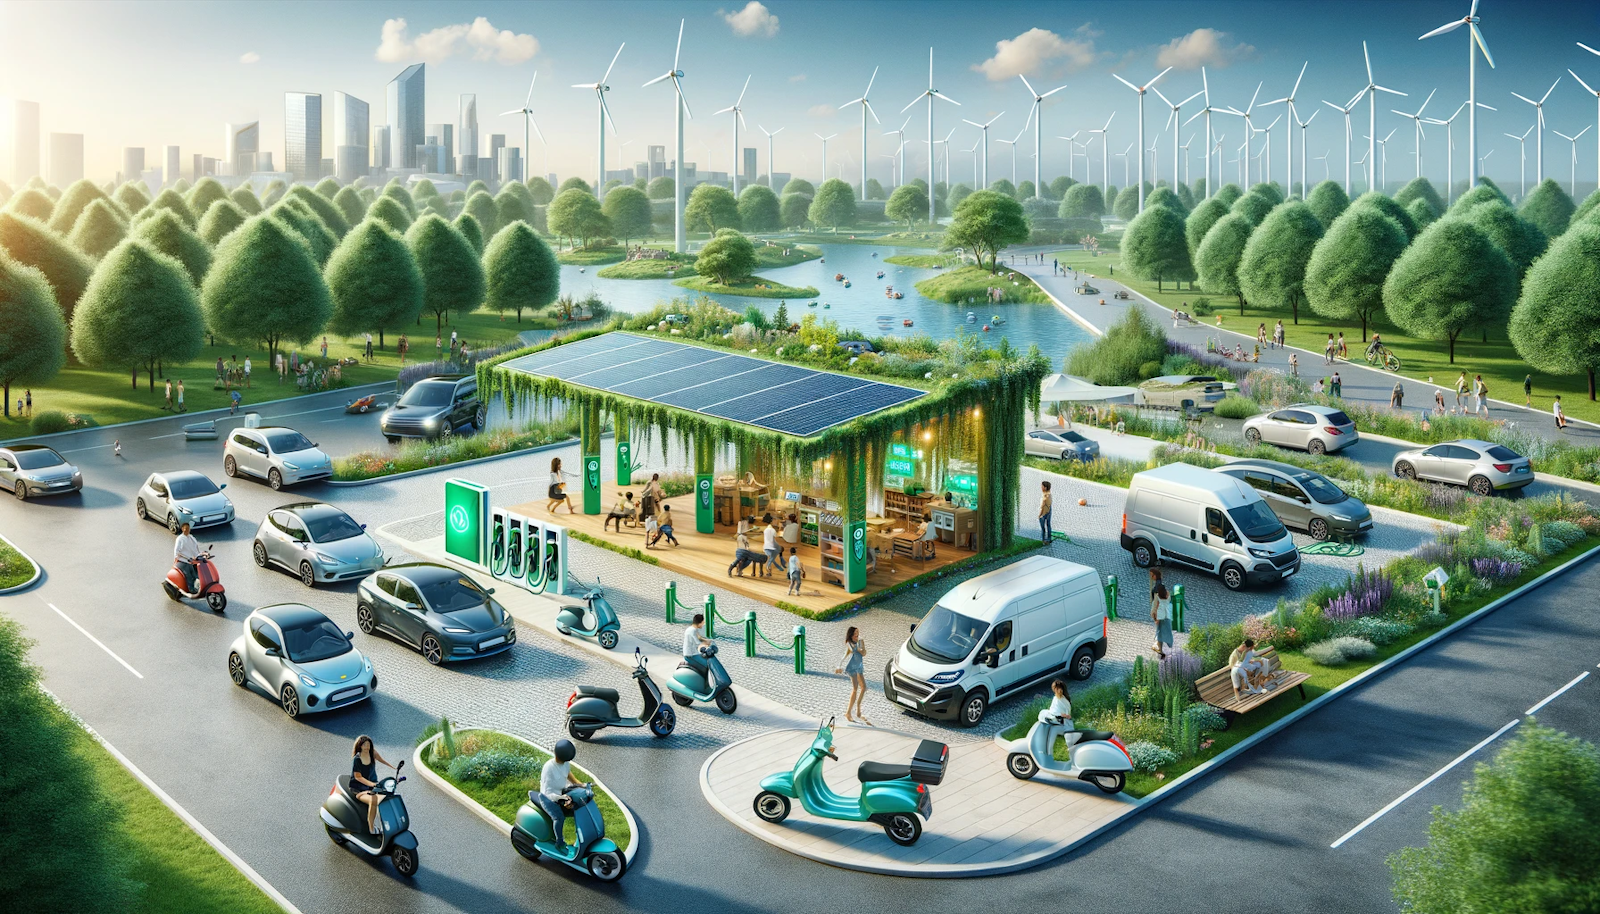 Modern green city park with diverse electric vehicles parked around a solar-powered charging station, amidst people enjoying the eco-friendly environment, with a city skyline featuring wind turbines in the background, symbolizing progress towards sustainable urban living.